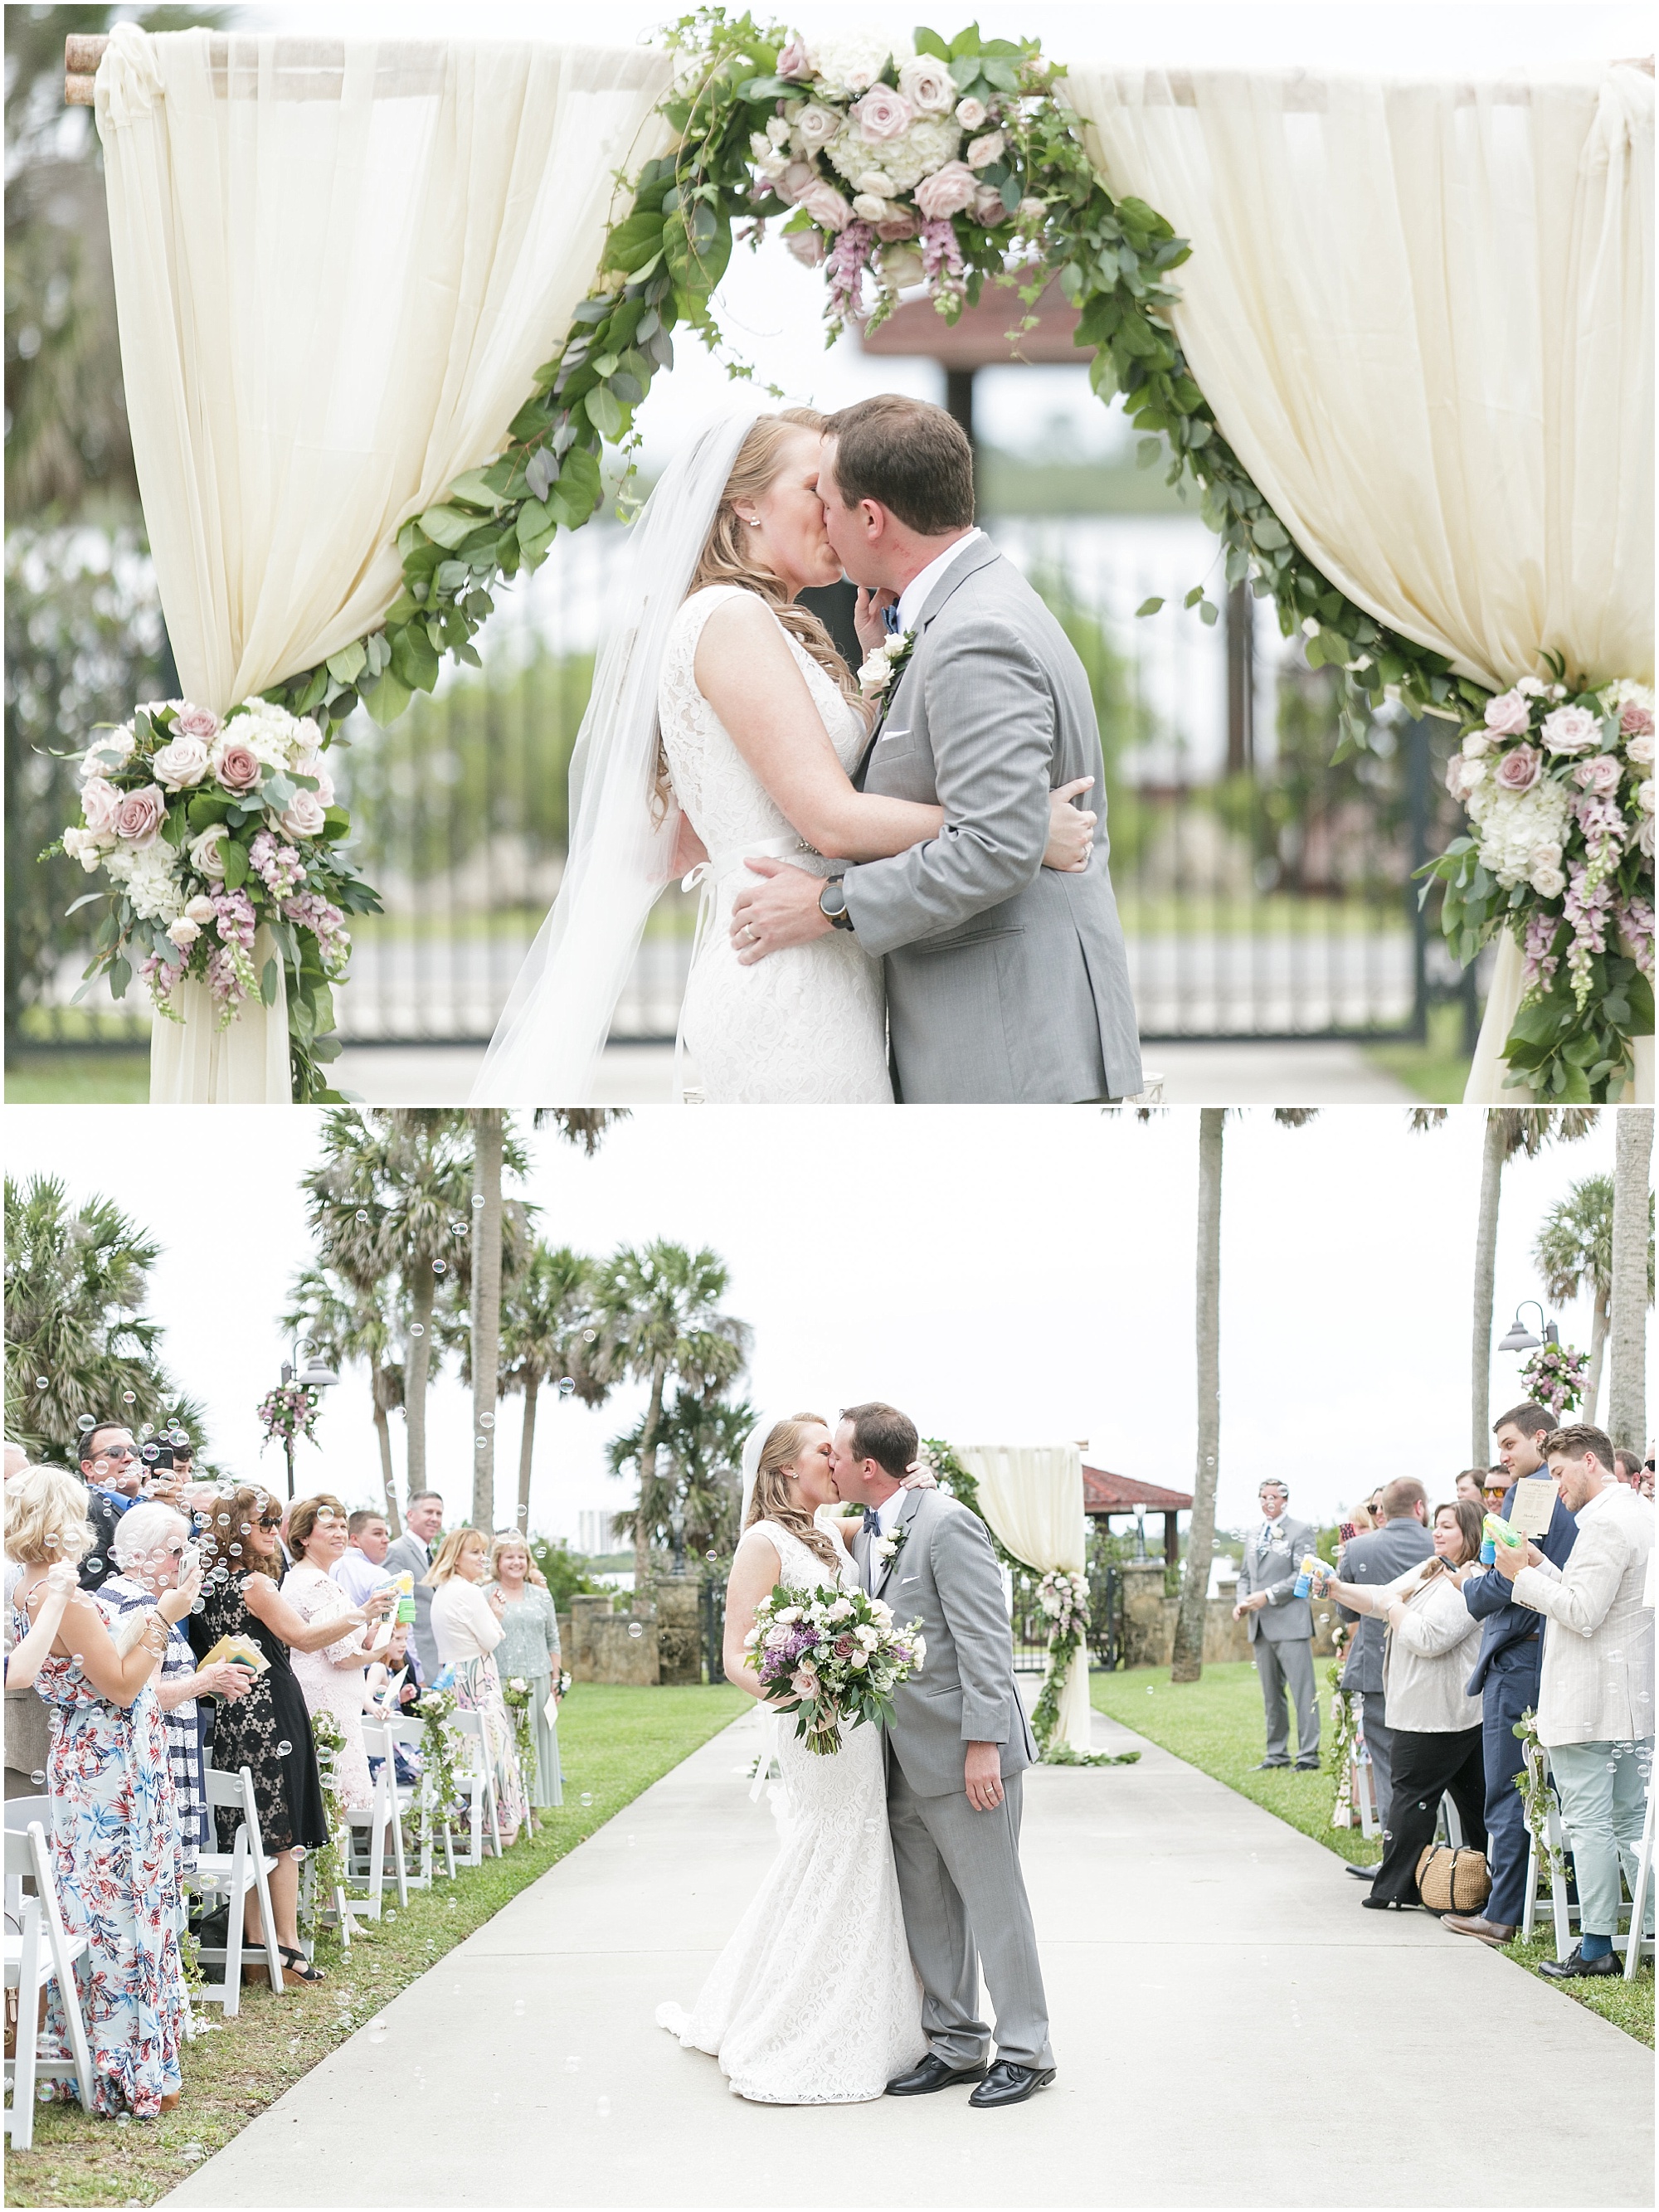 Just married couple share their first kiss of their marriage.